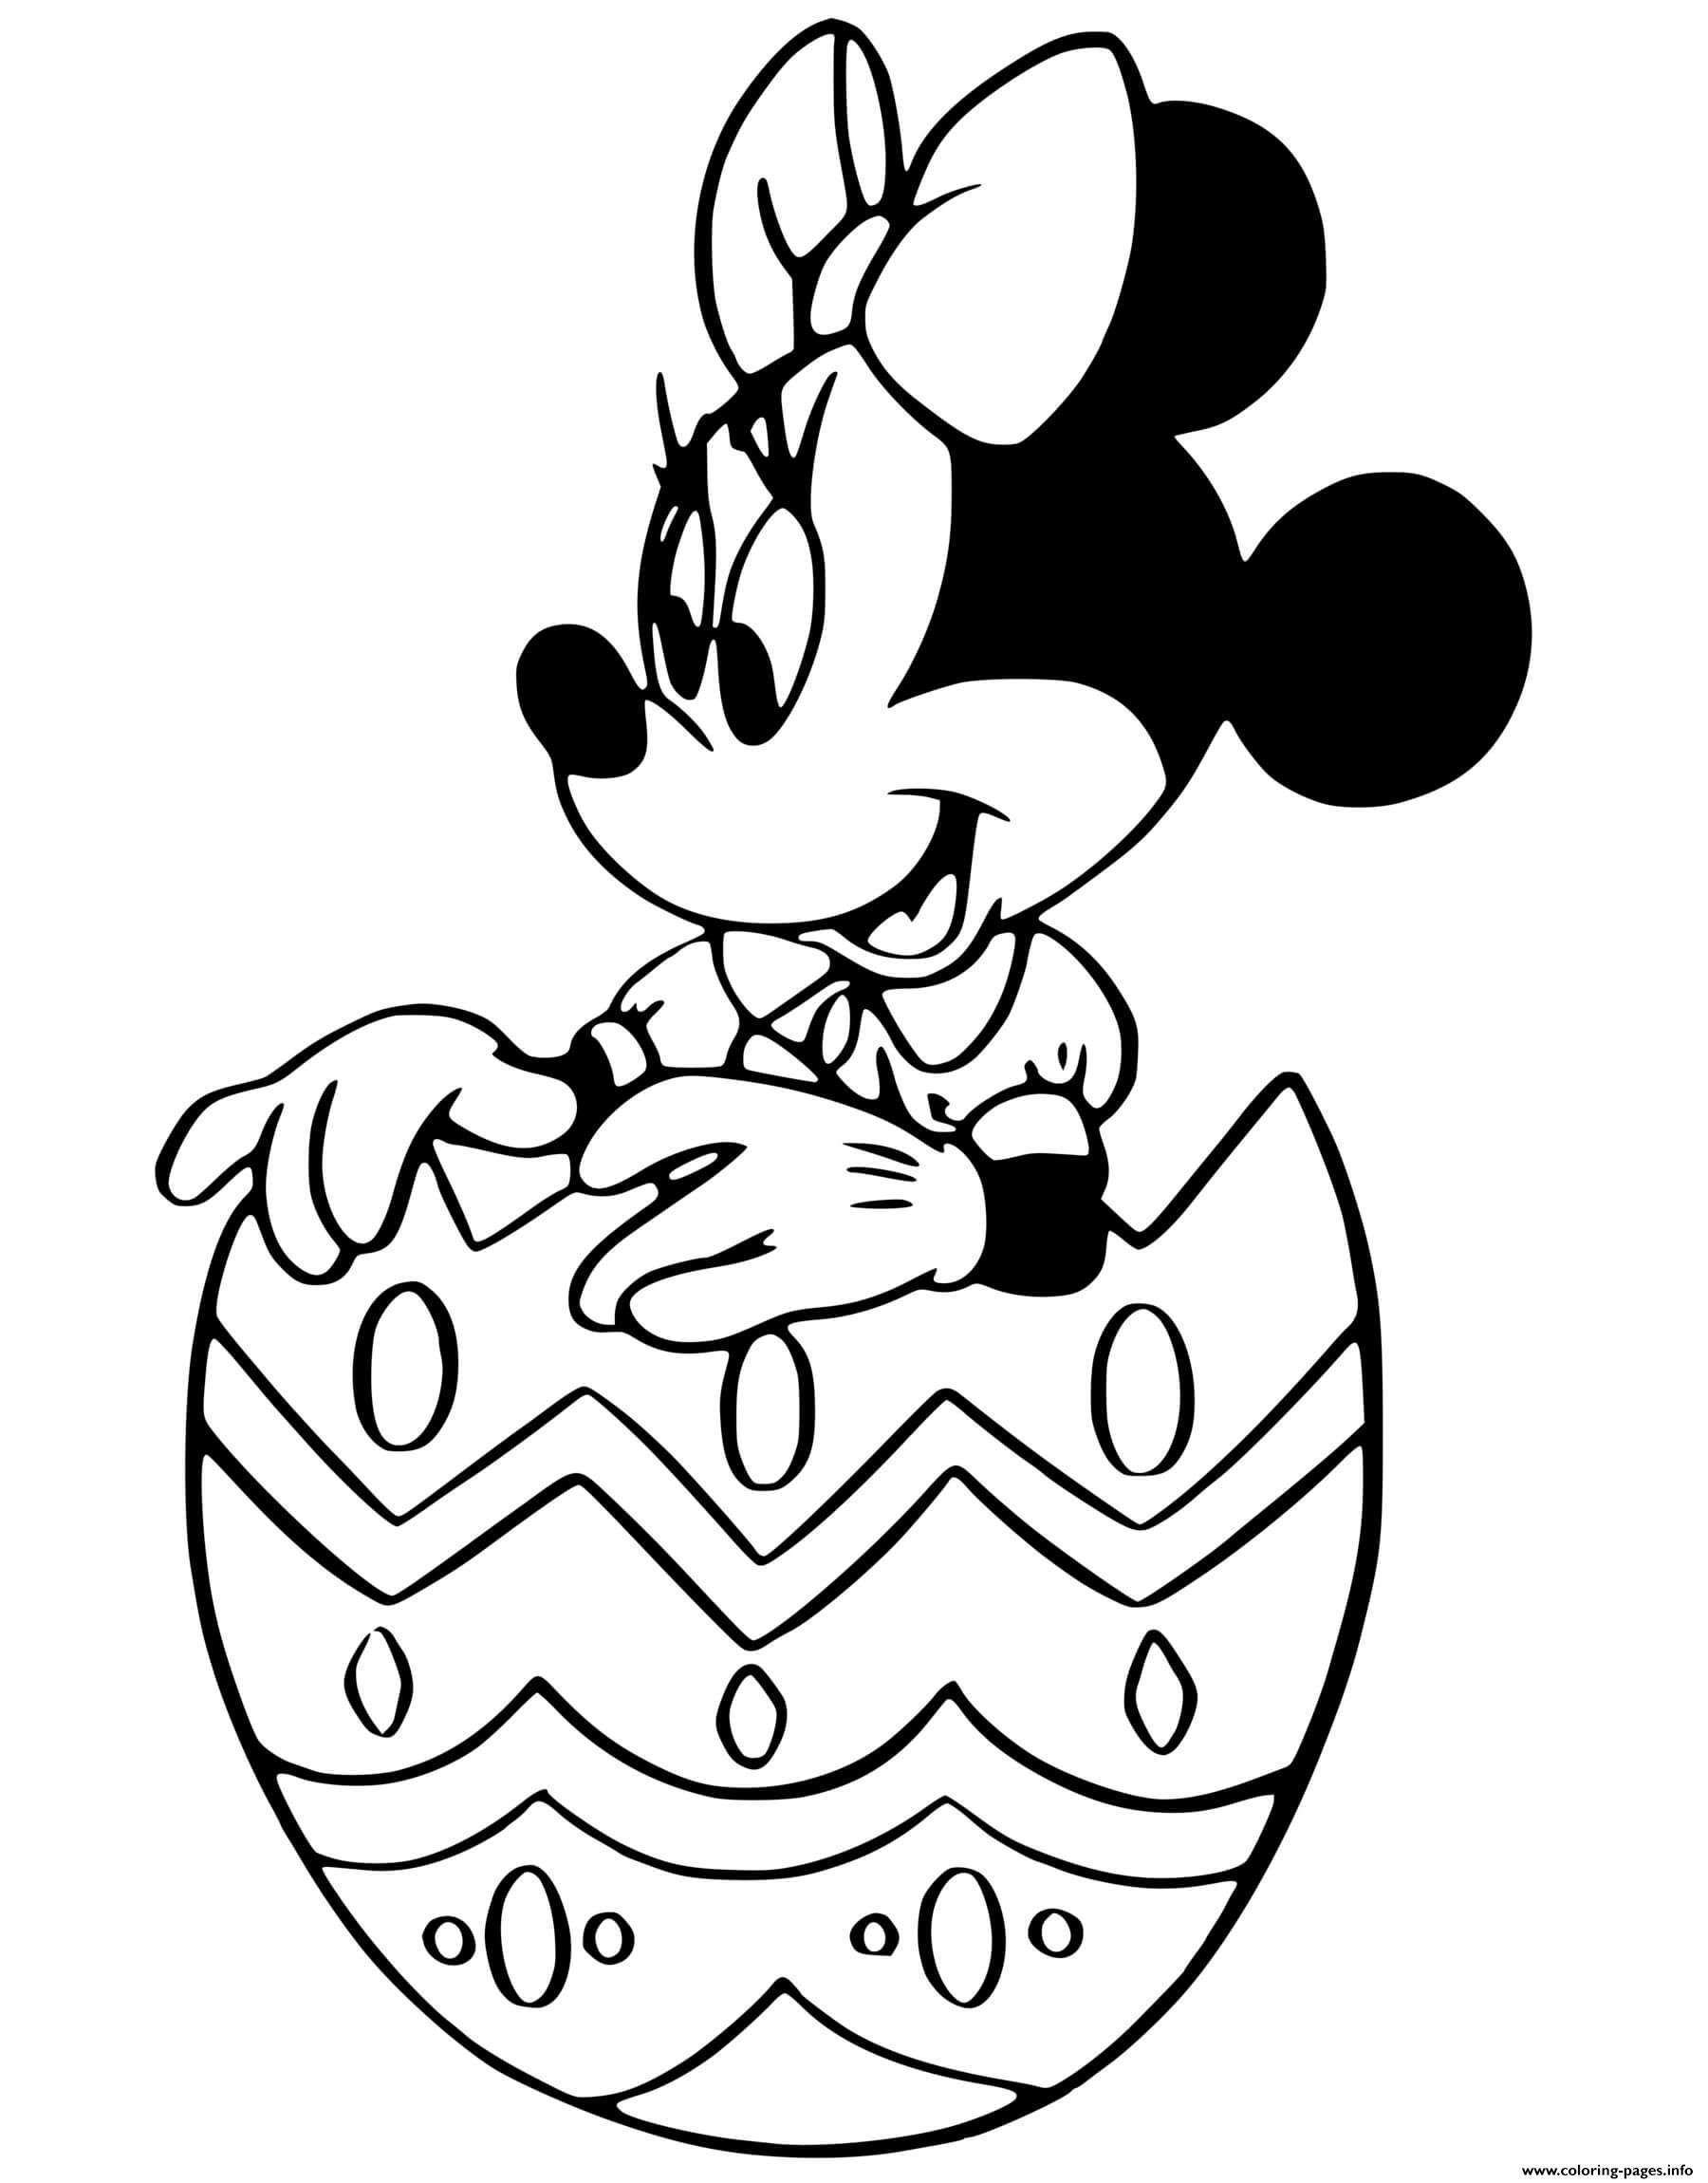 Minnie Mouse Easter Egg coloring